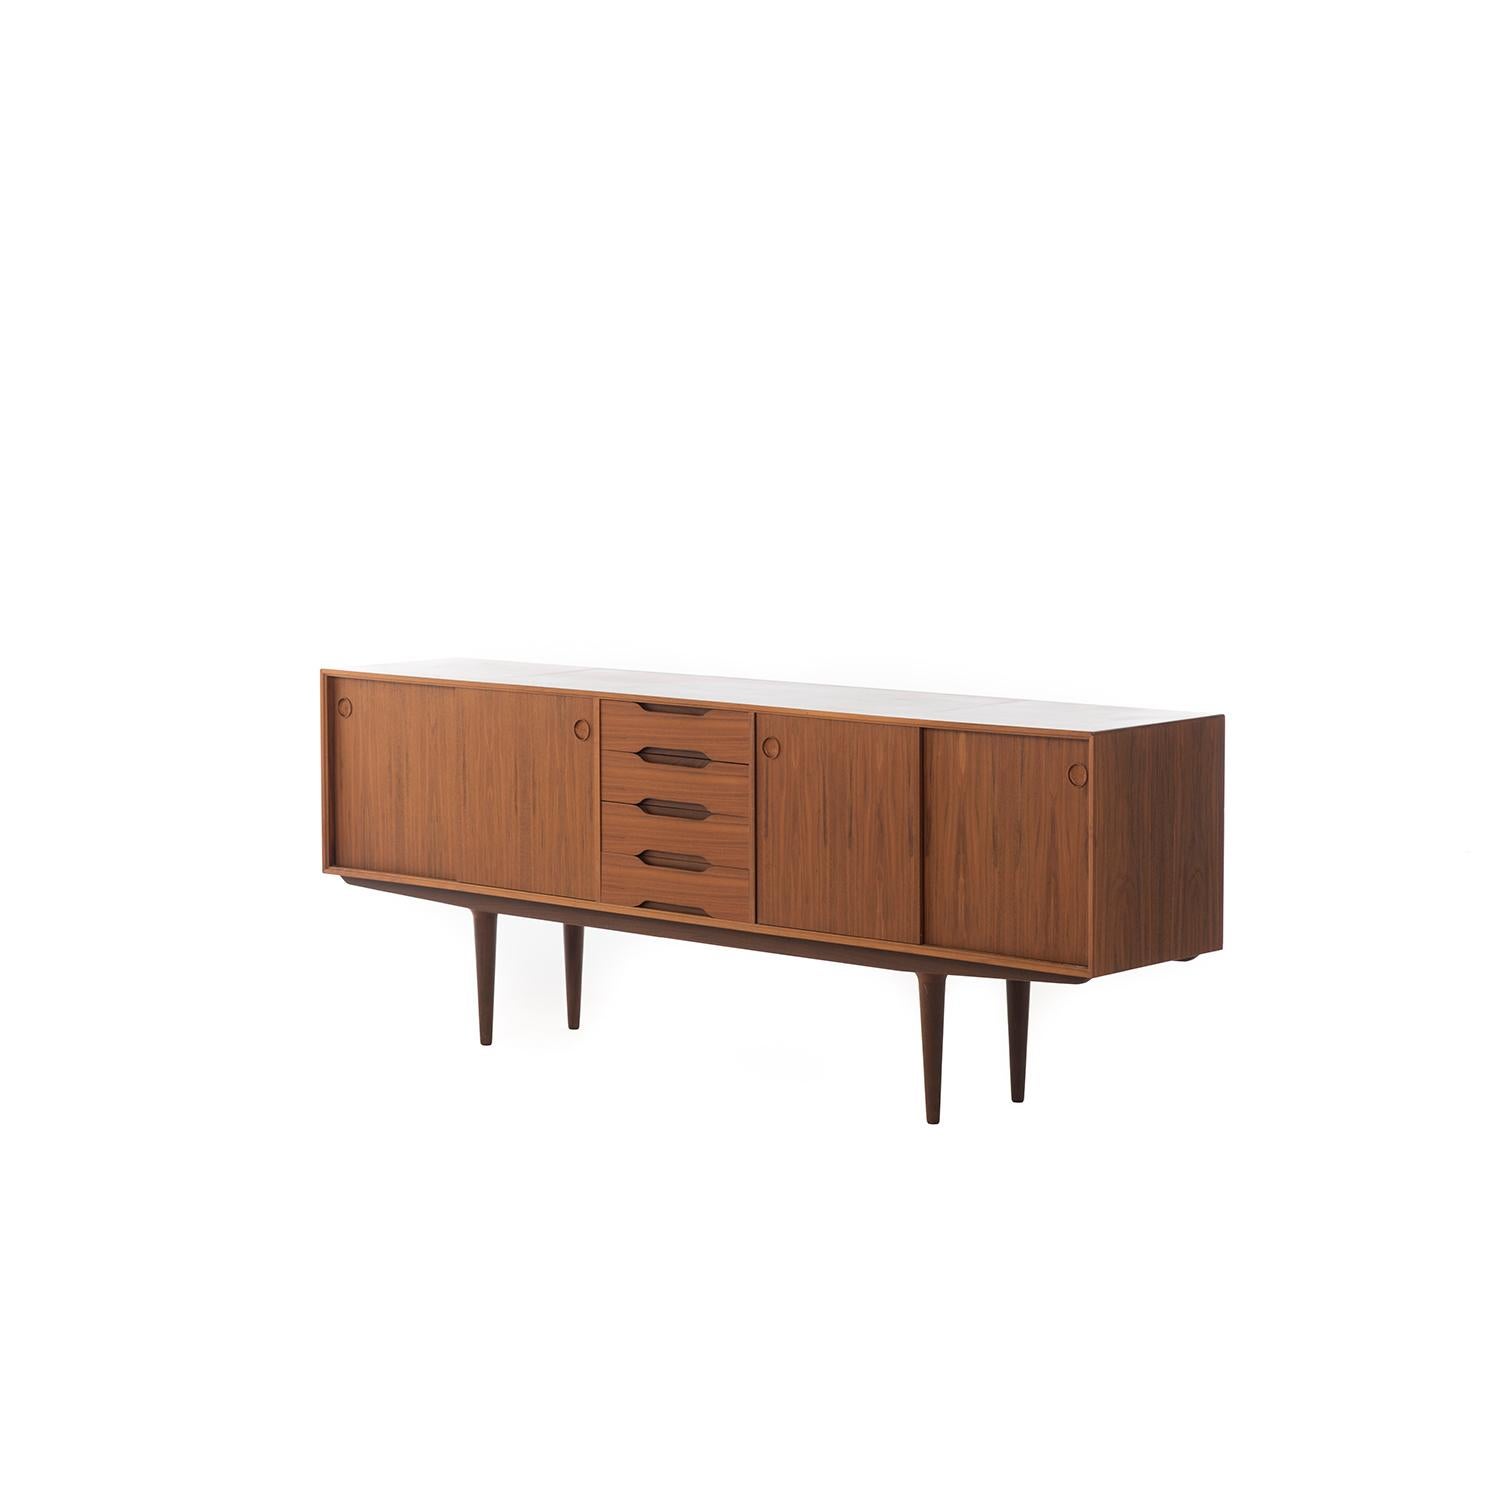 Mid-Century Modern walnut credenza with sliding doors. Features adjustable shelves and four silver drawers.